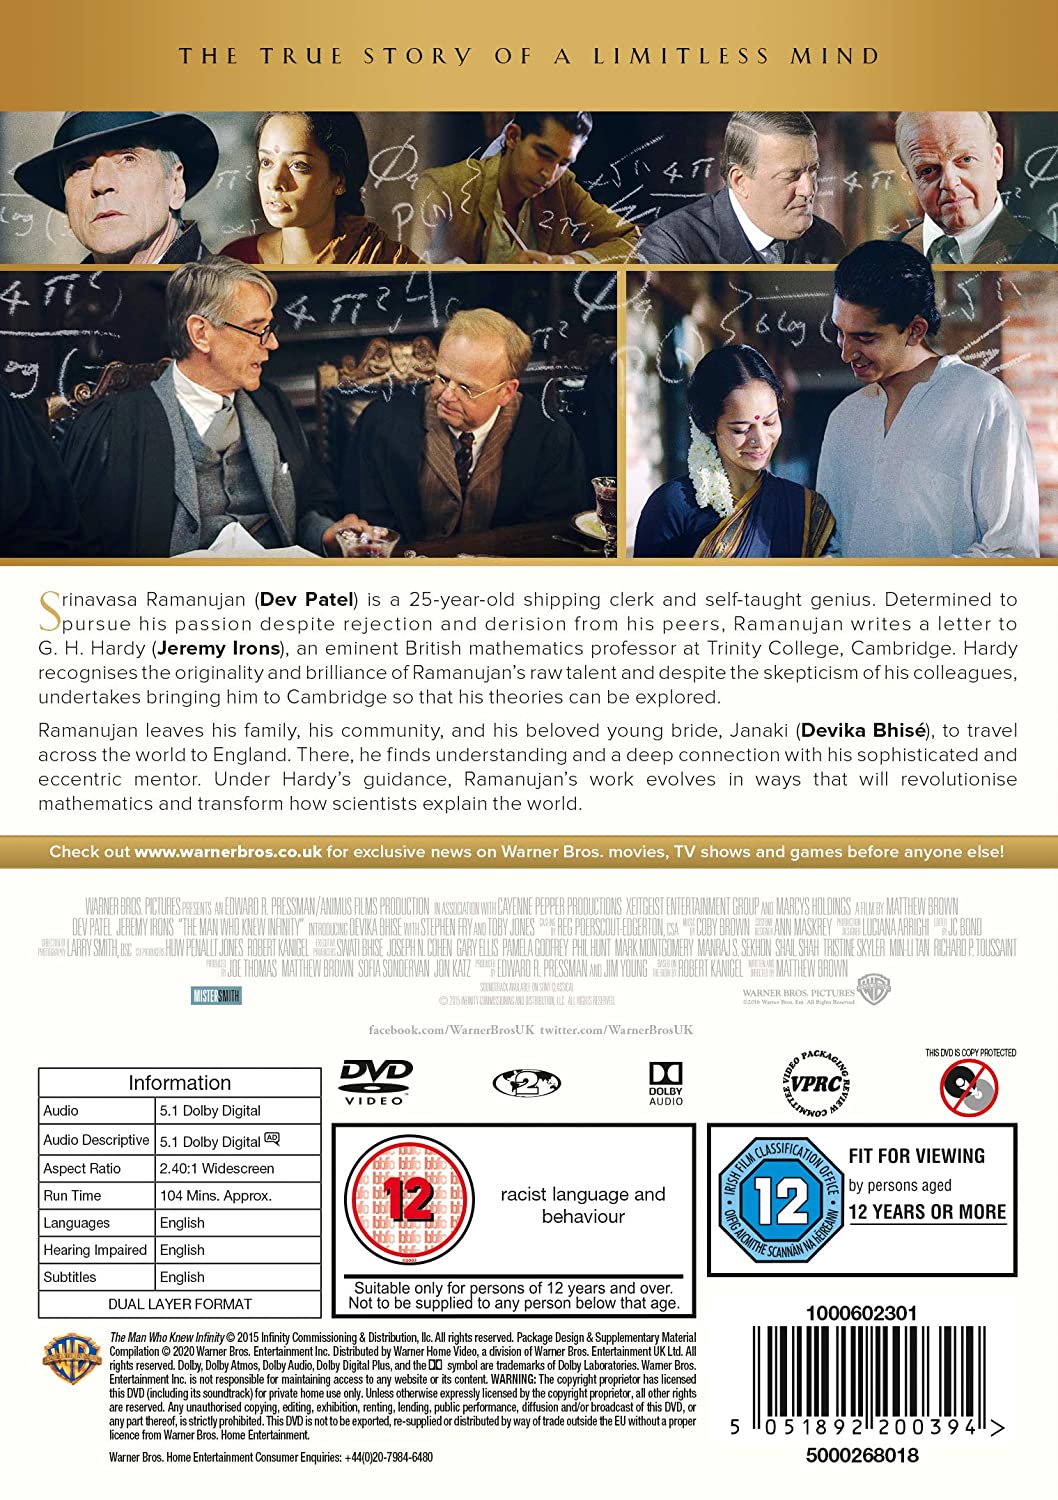 The Man Who Knew Infinity [2016] (DVD)